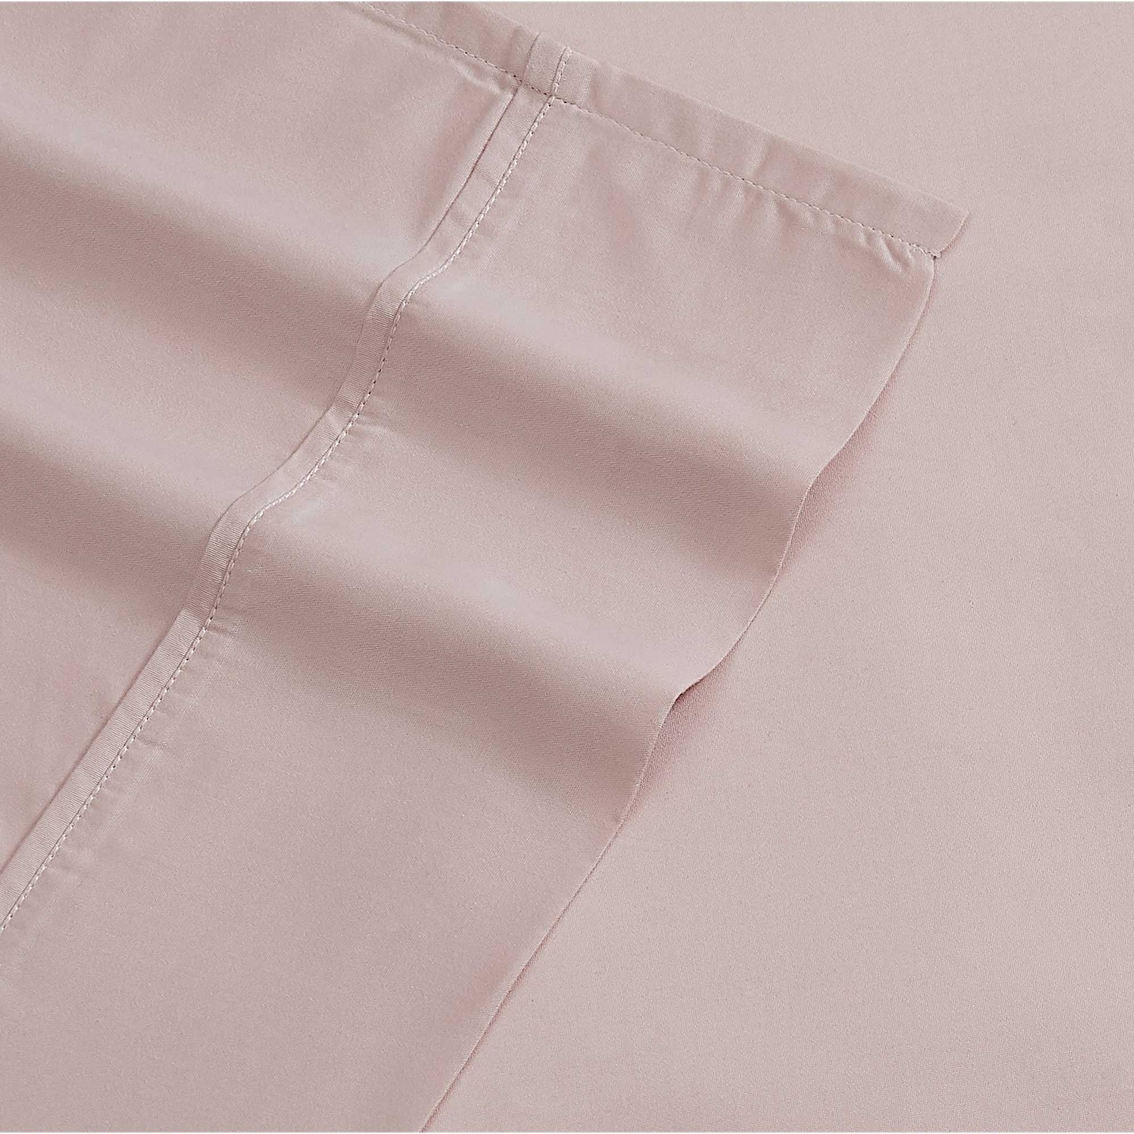 Vince Camuto1000 Thread Count Cotton Blend 6 pc. Sheet Set - Image 3 of 3